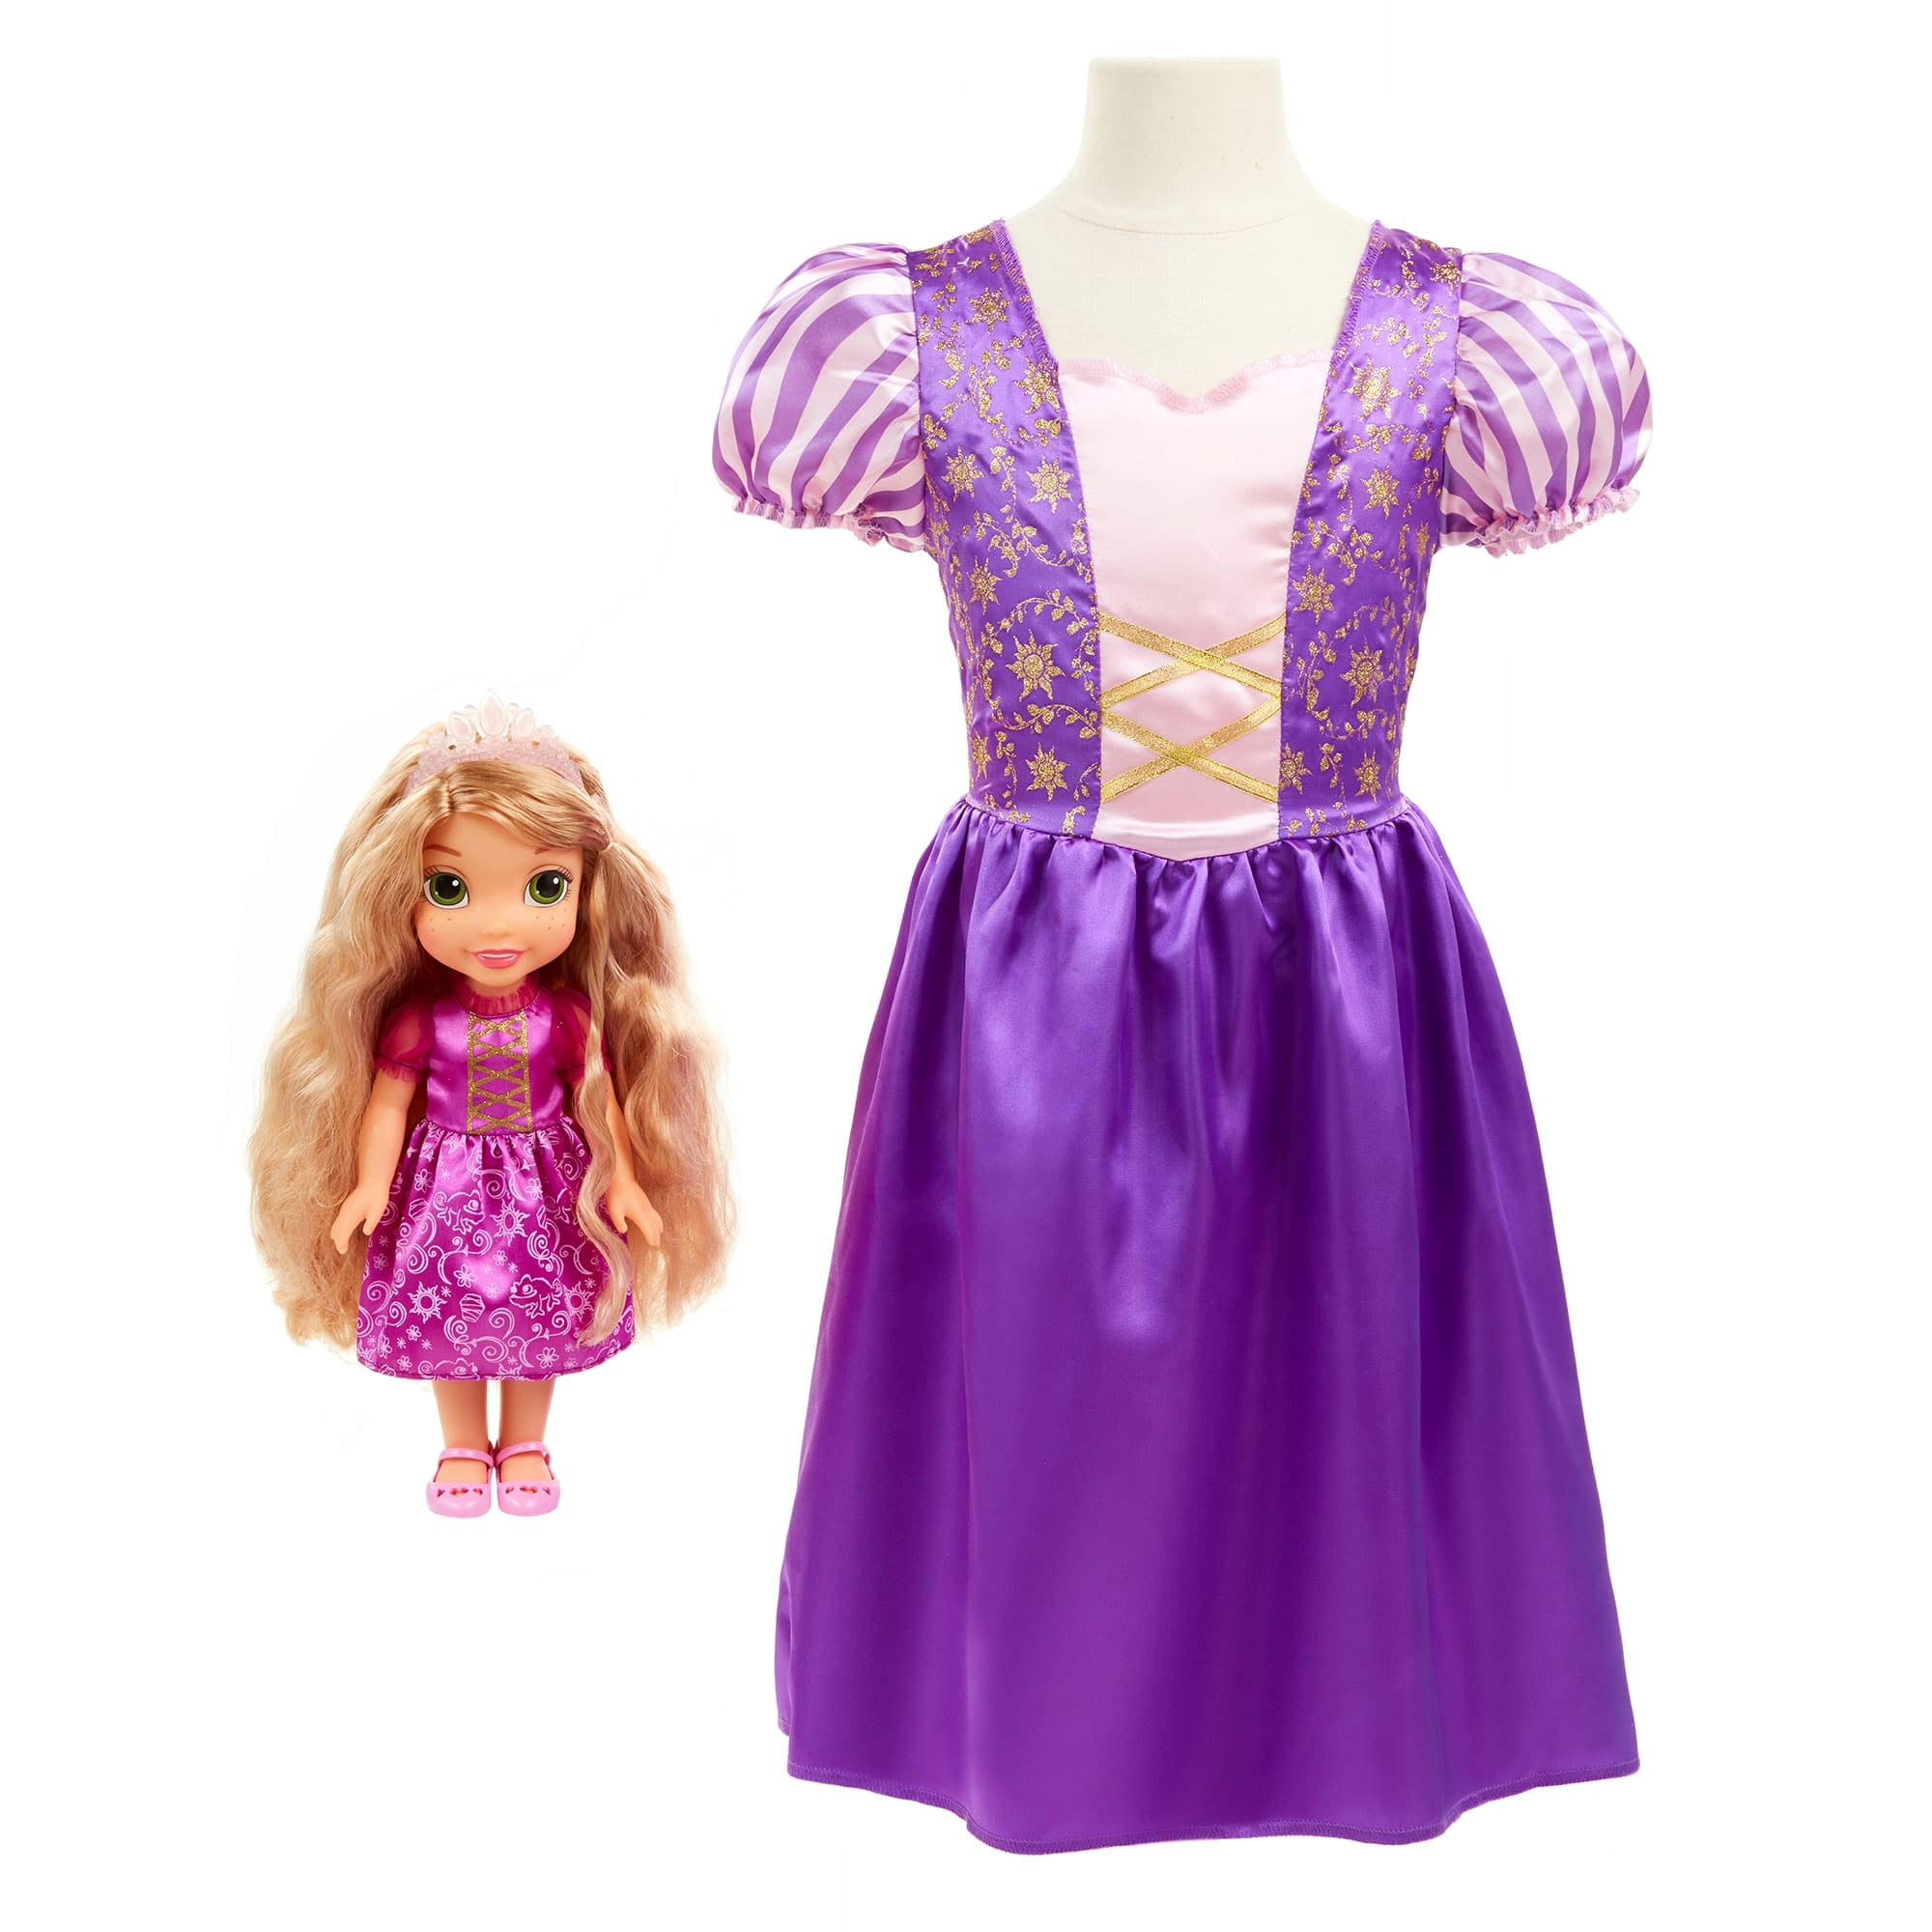 princess toy videos for toddlers